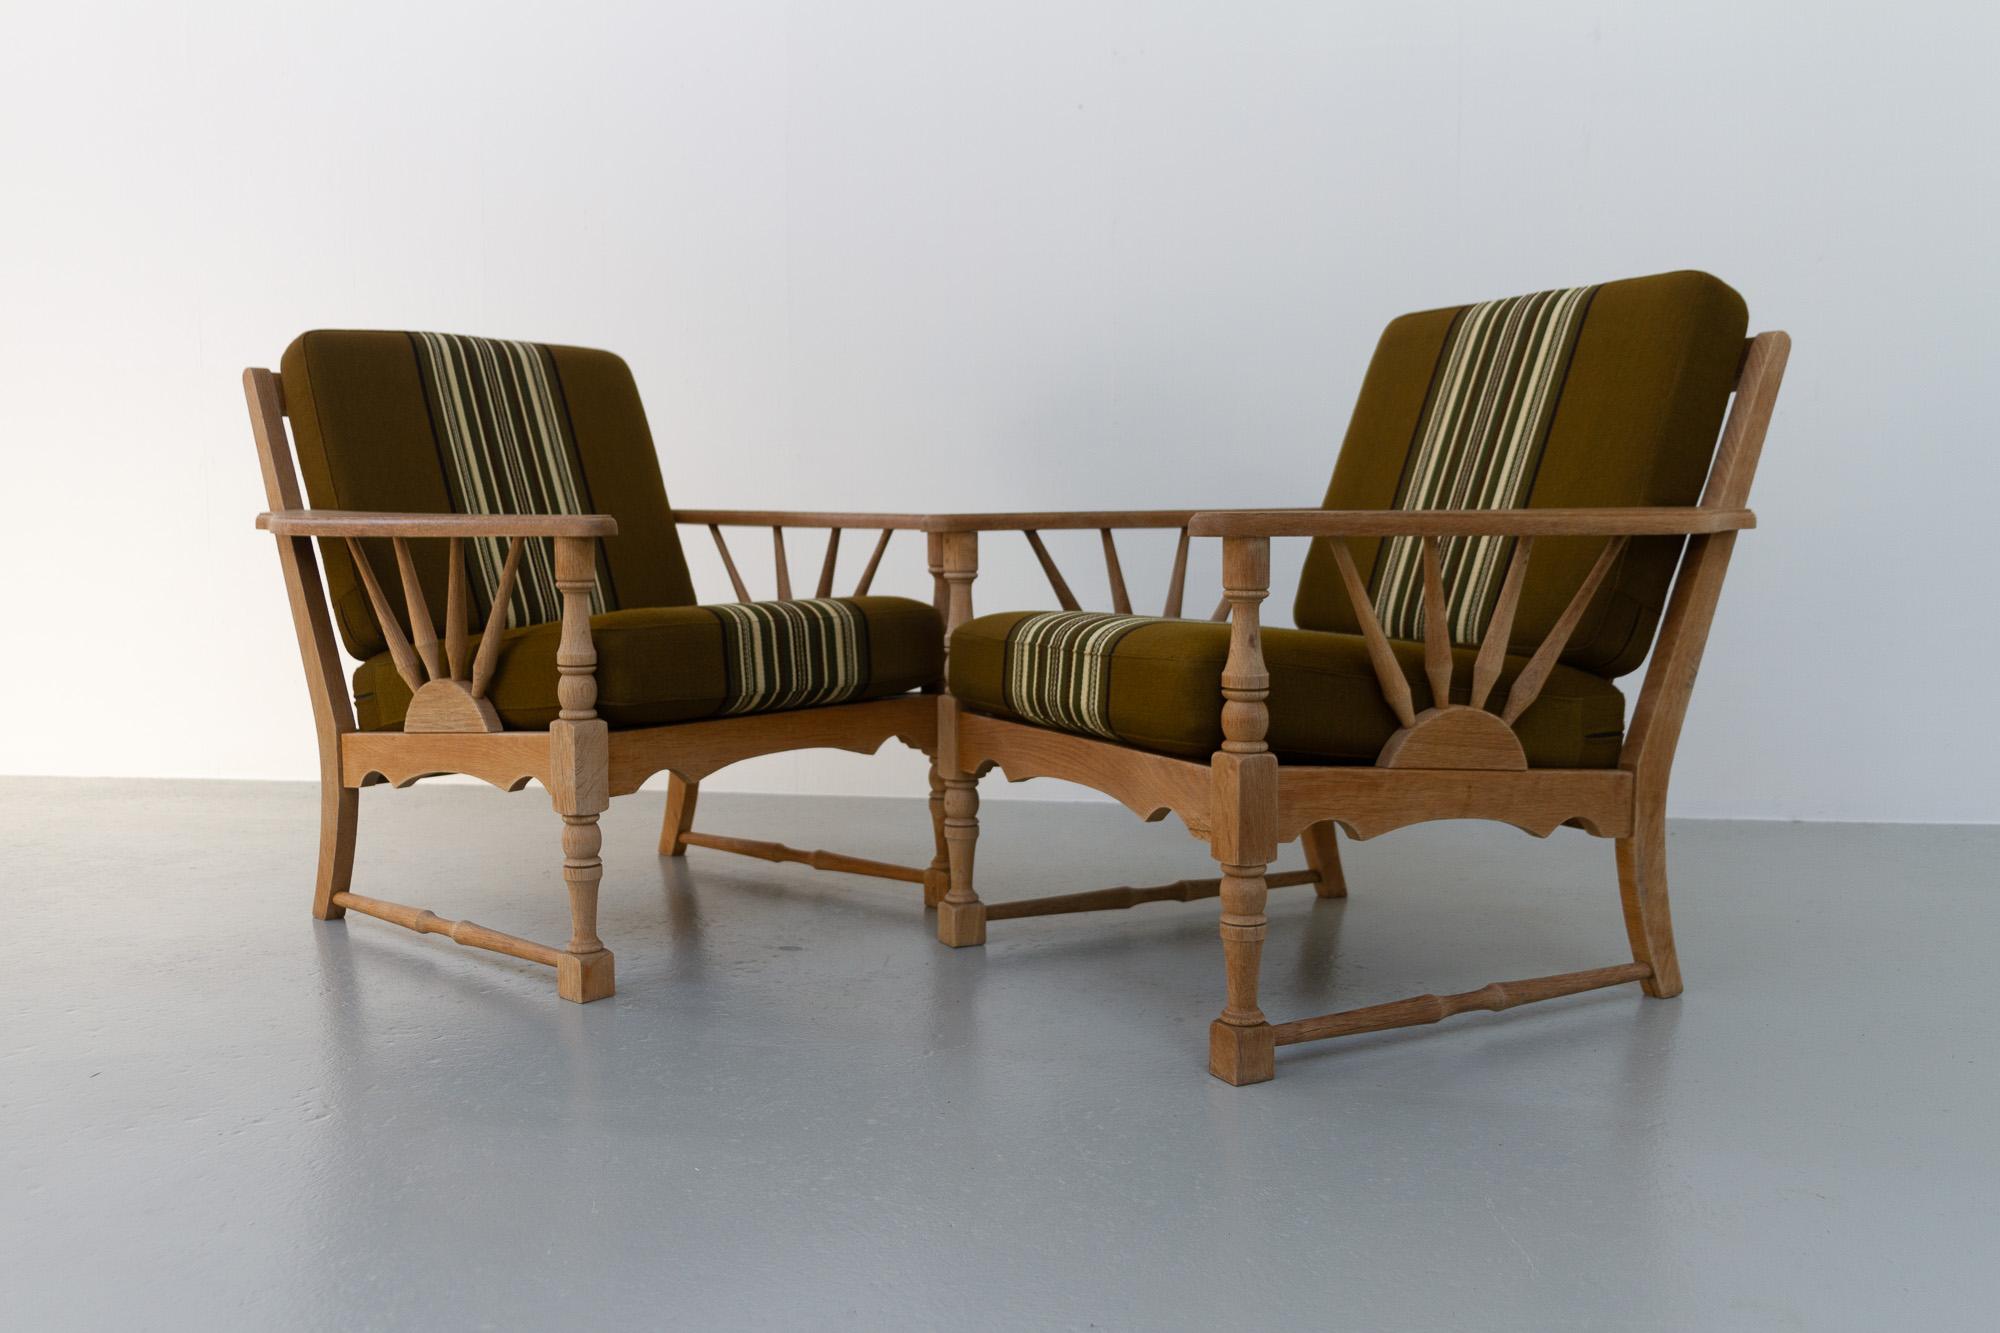 Mid-20th Century Vintage Danish Lounge Chairs in Oak, 1960s. Set of 2.